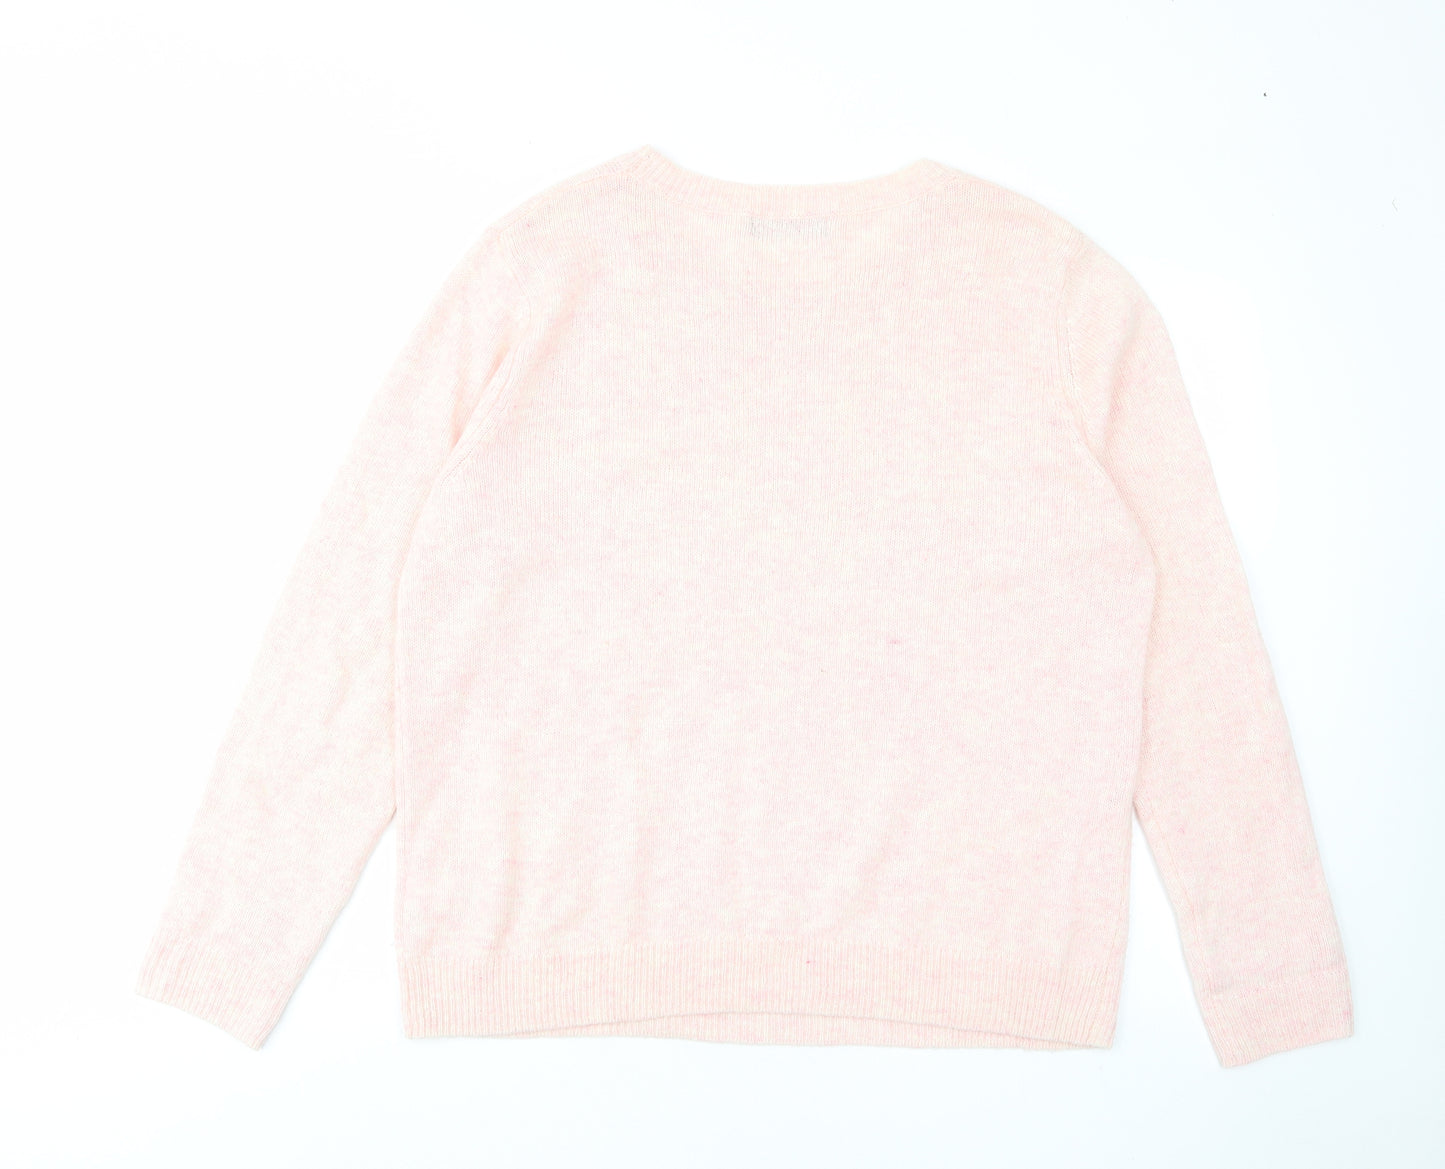 Marks and Spencer Womens Pink Crew Neck Viscose Pullover Jumper Size L - Snowflakes, Embroided, Sequins